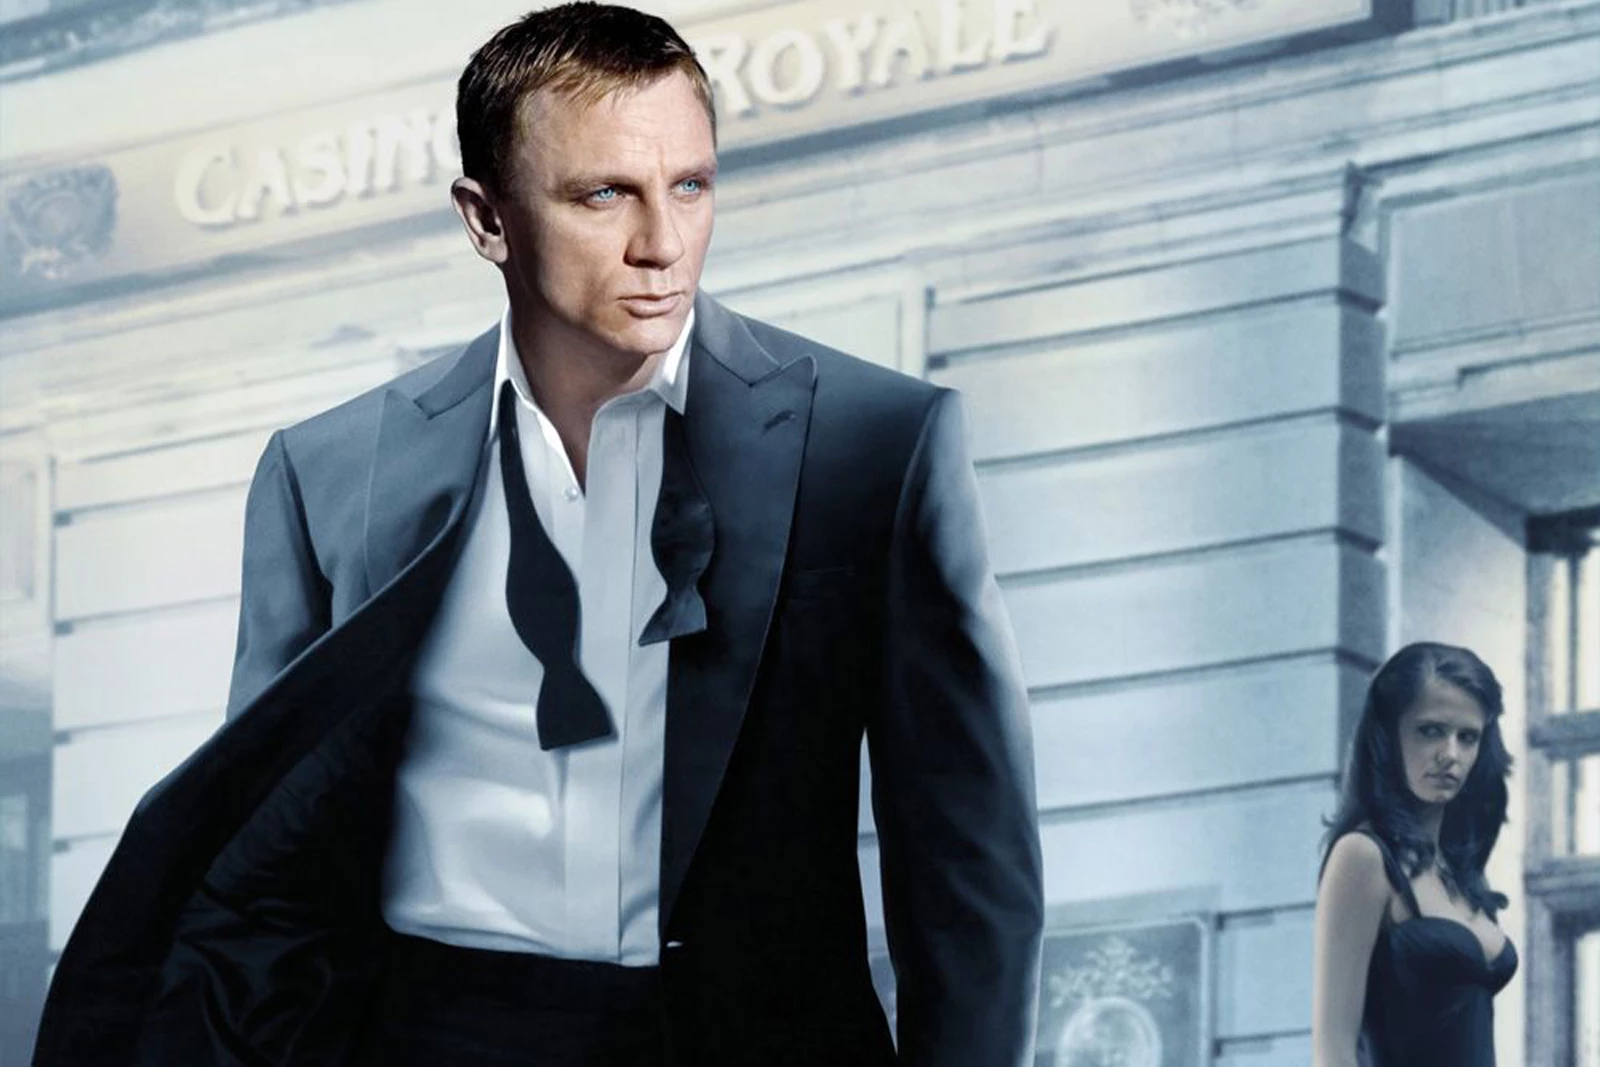 How 'Casino Royale' Rebooted James Bond for the 21st Century